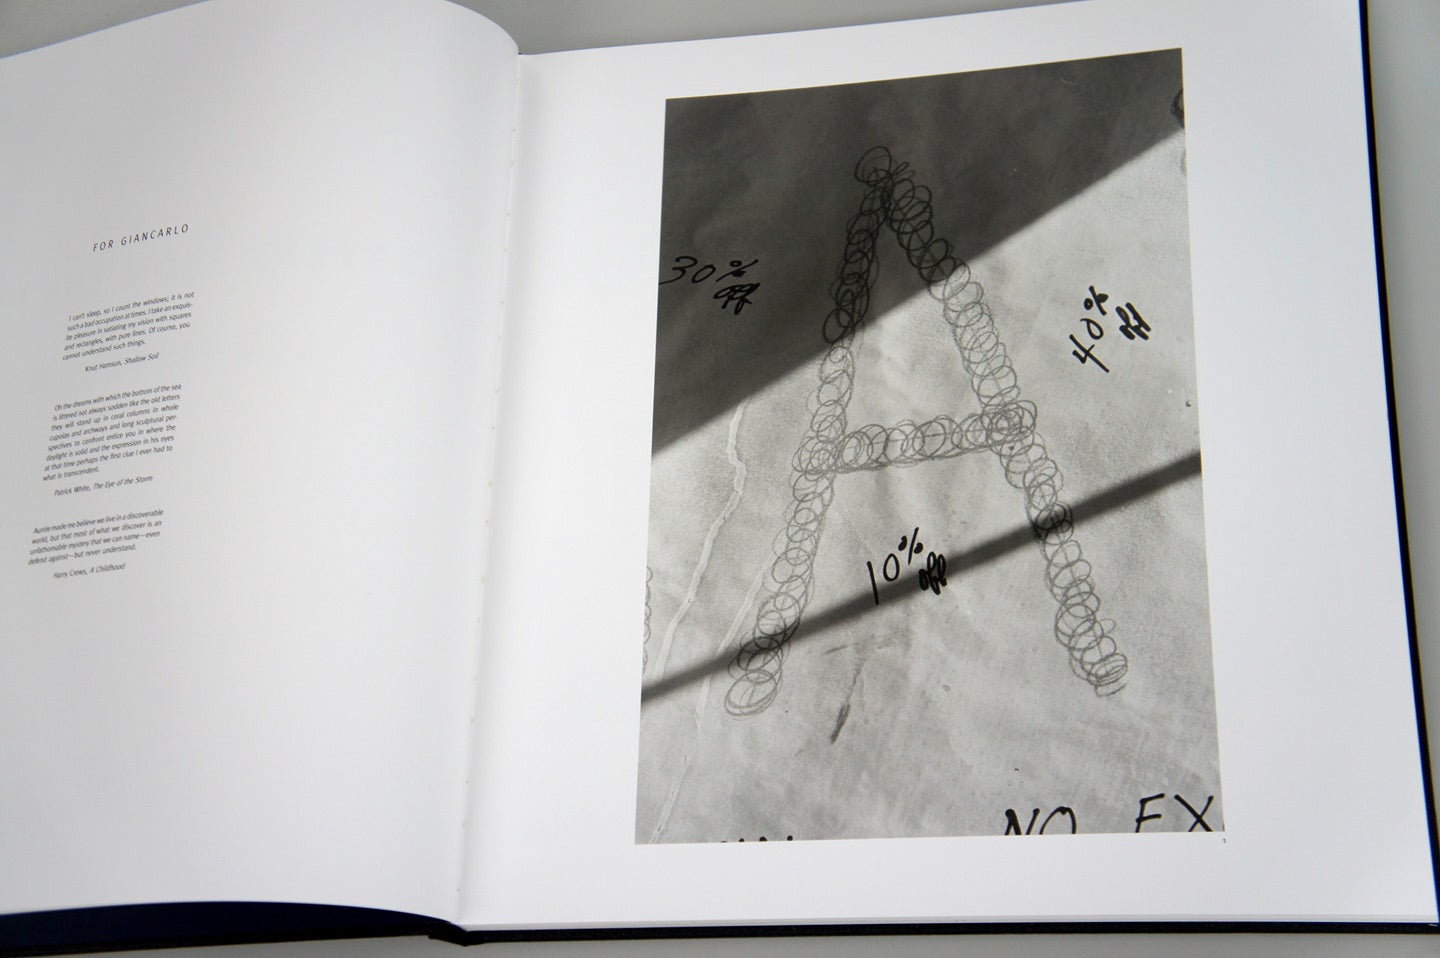 Lee Friedlander: Letters from the People (Special Limited Edition with One Vintage Gelatin Silver Print: "L")